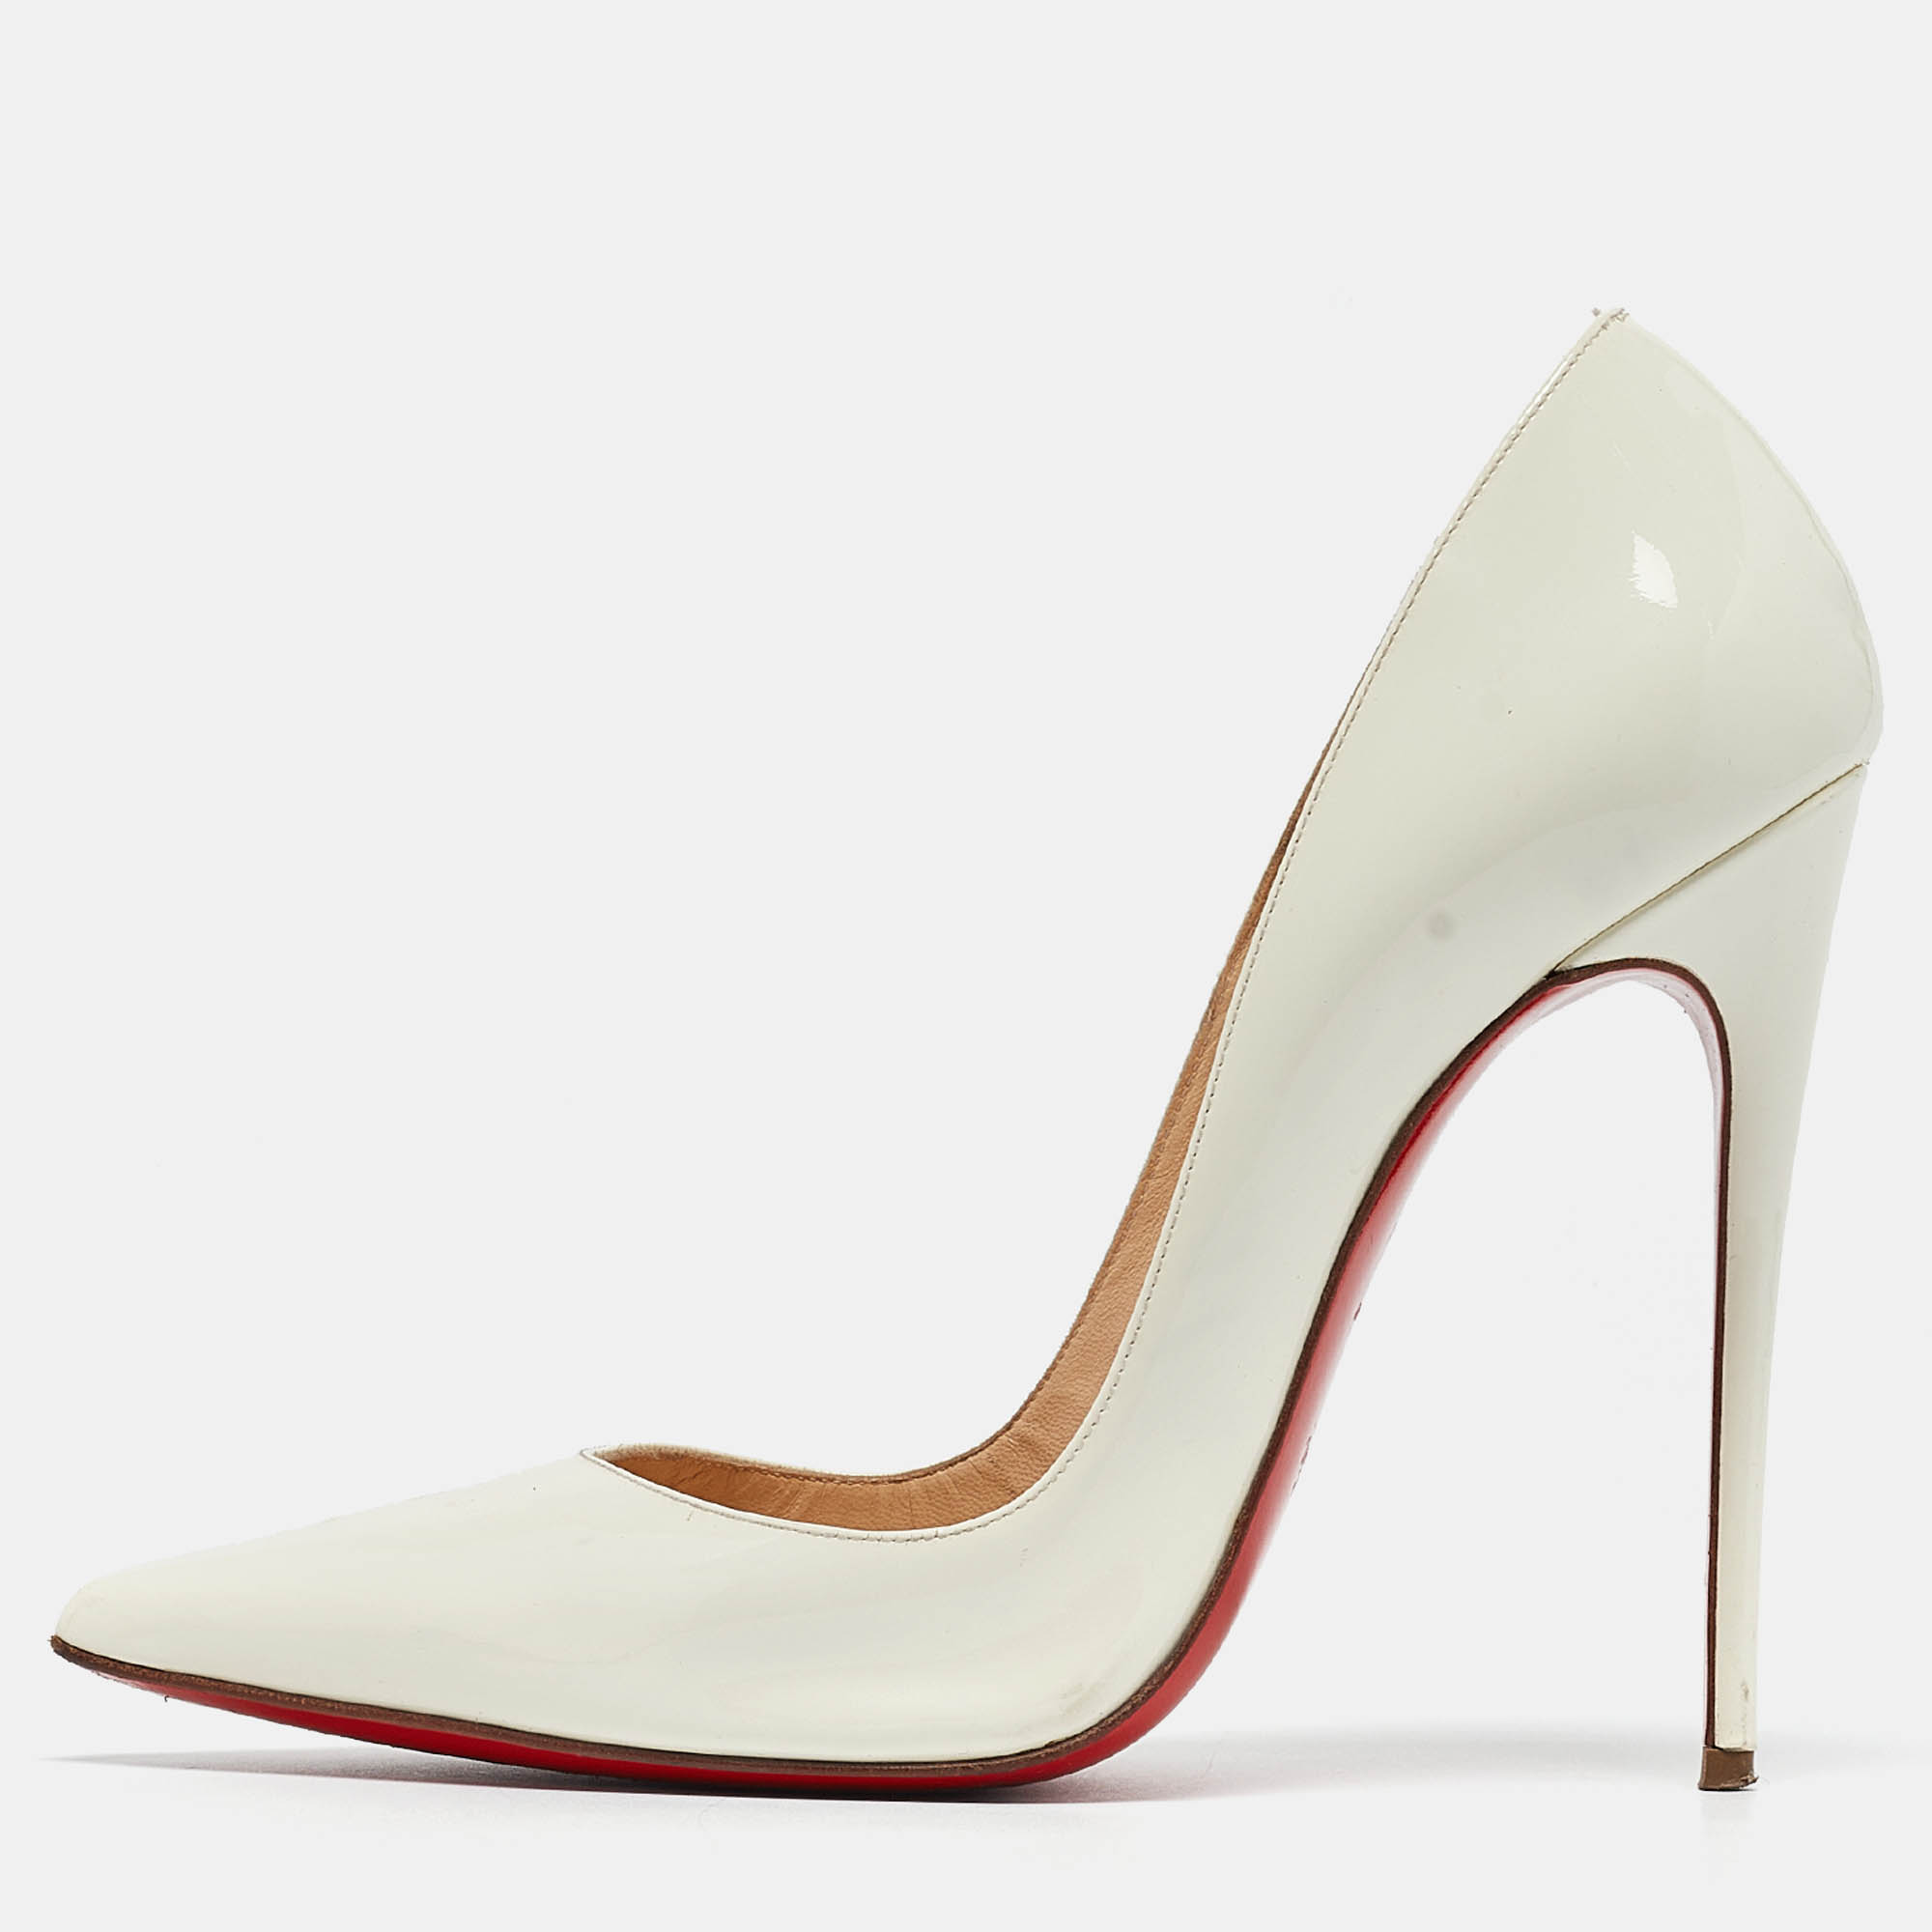 Christian louboutin white patent leather so kate pumps size 38.5